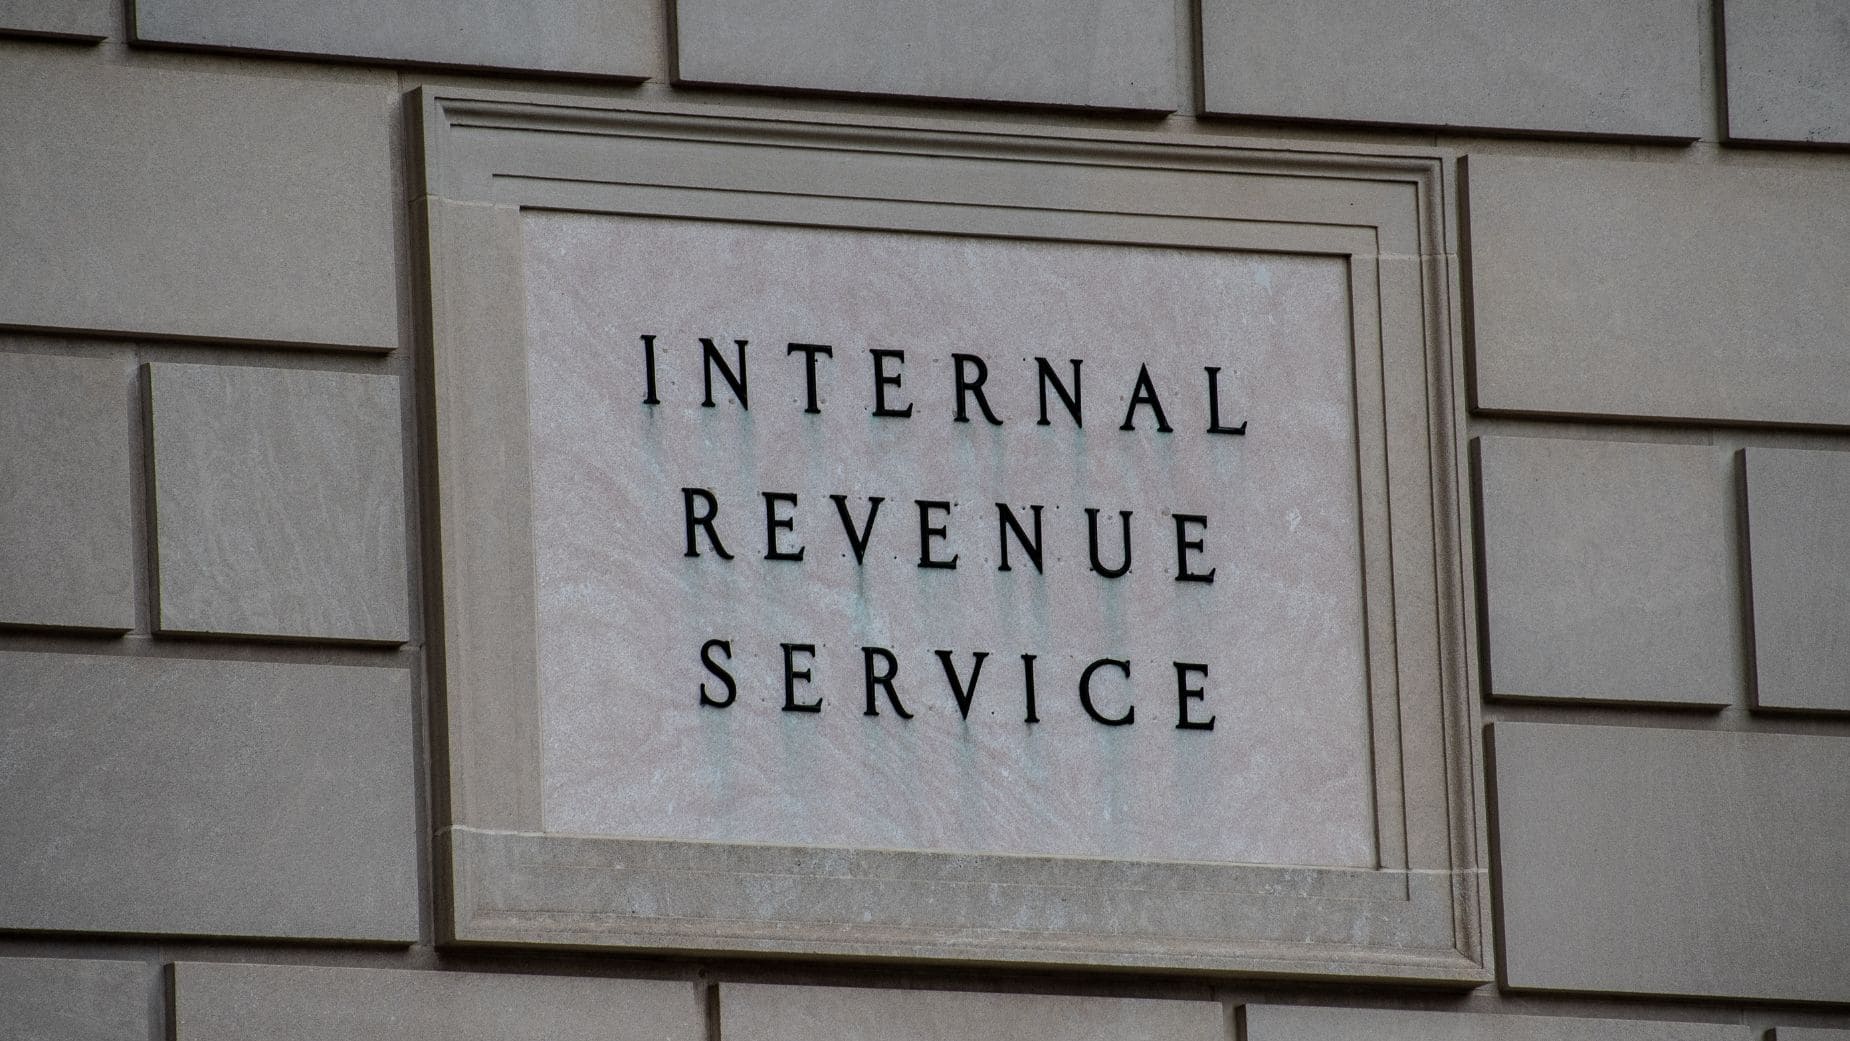 The IRS announces the best way to prepare all of our documents for Tax Season